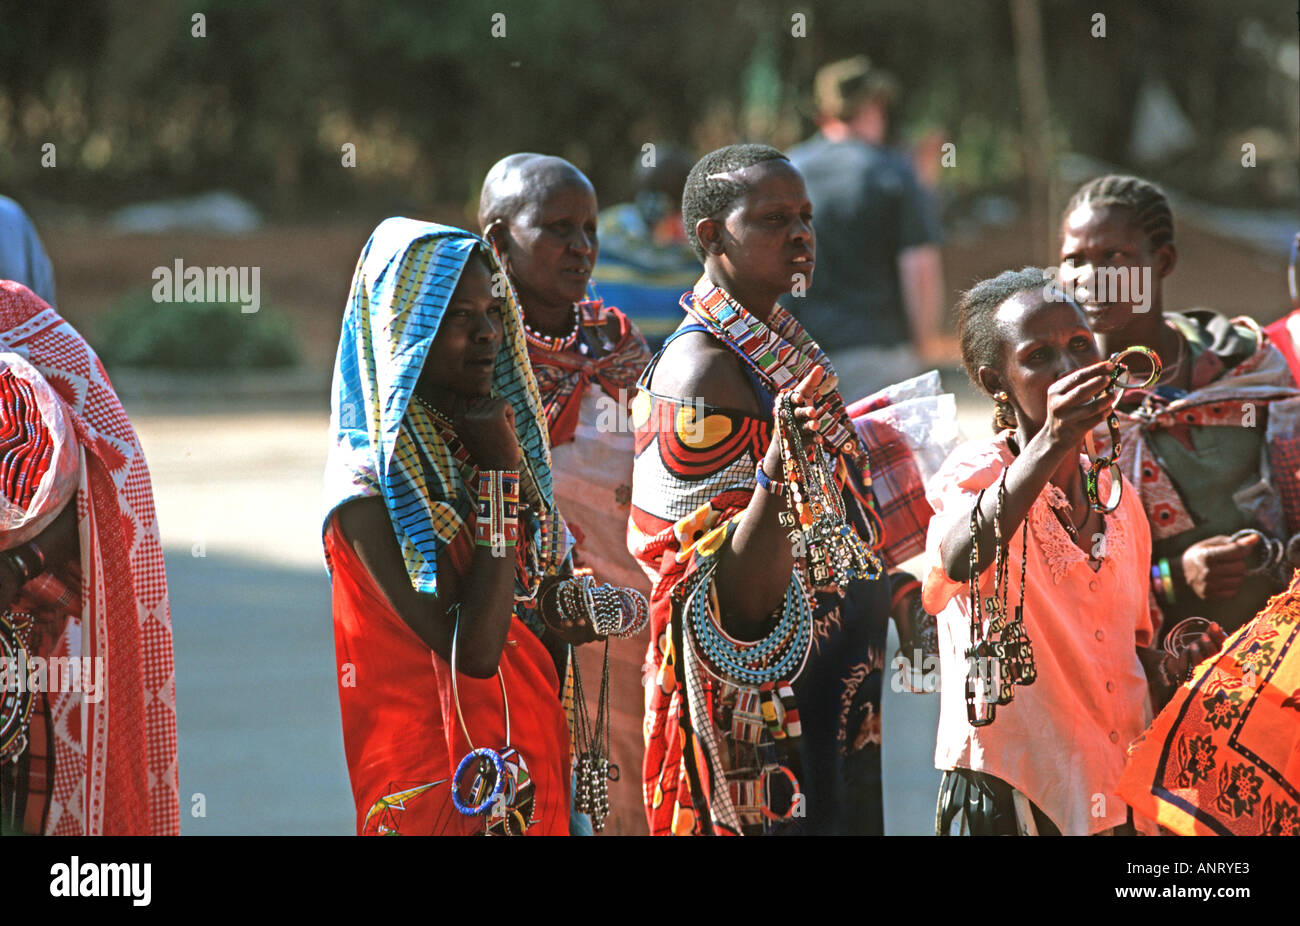 Kenyan Masai women selling handmade bracelets necklaces and other souvenirs at the border crossing from Tanzania Kenya Stock Photo